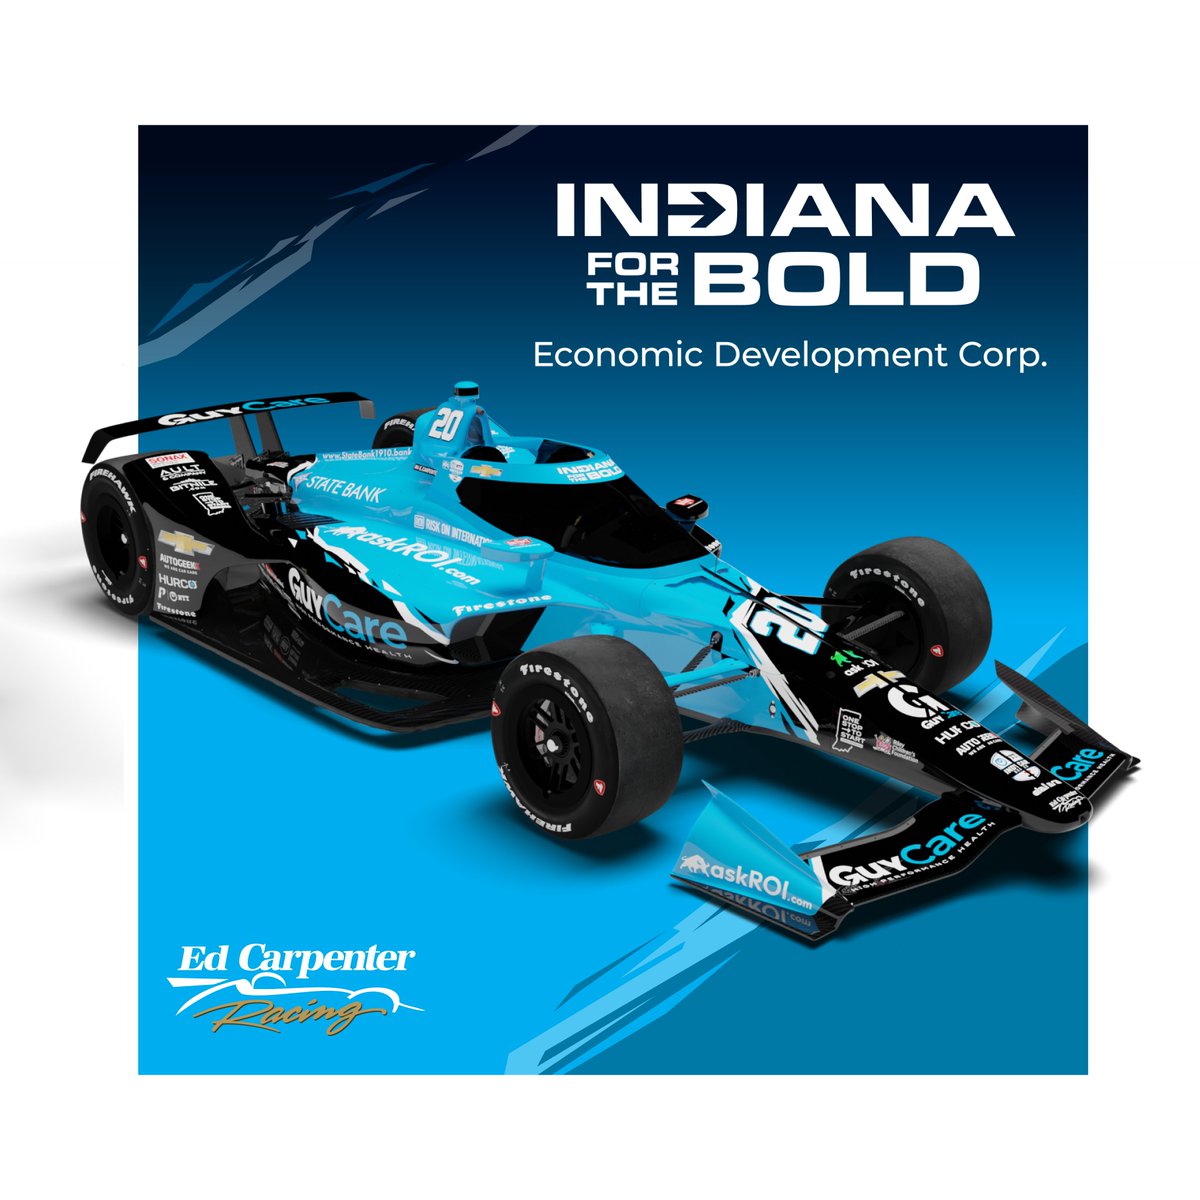 That’s one bold livery! We can’t wait to cheer on Indiana entrepreneur @ECRIndy in the #Indy500! 📢NEWS: @EdCarpenter20 will race under our “Indiana For The Bold” banner as Ed Carpenter Racing joins with IEDC for the #Indy500. ➡️ iedc.in.gov/for-the-bold